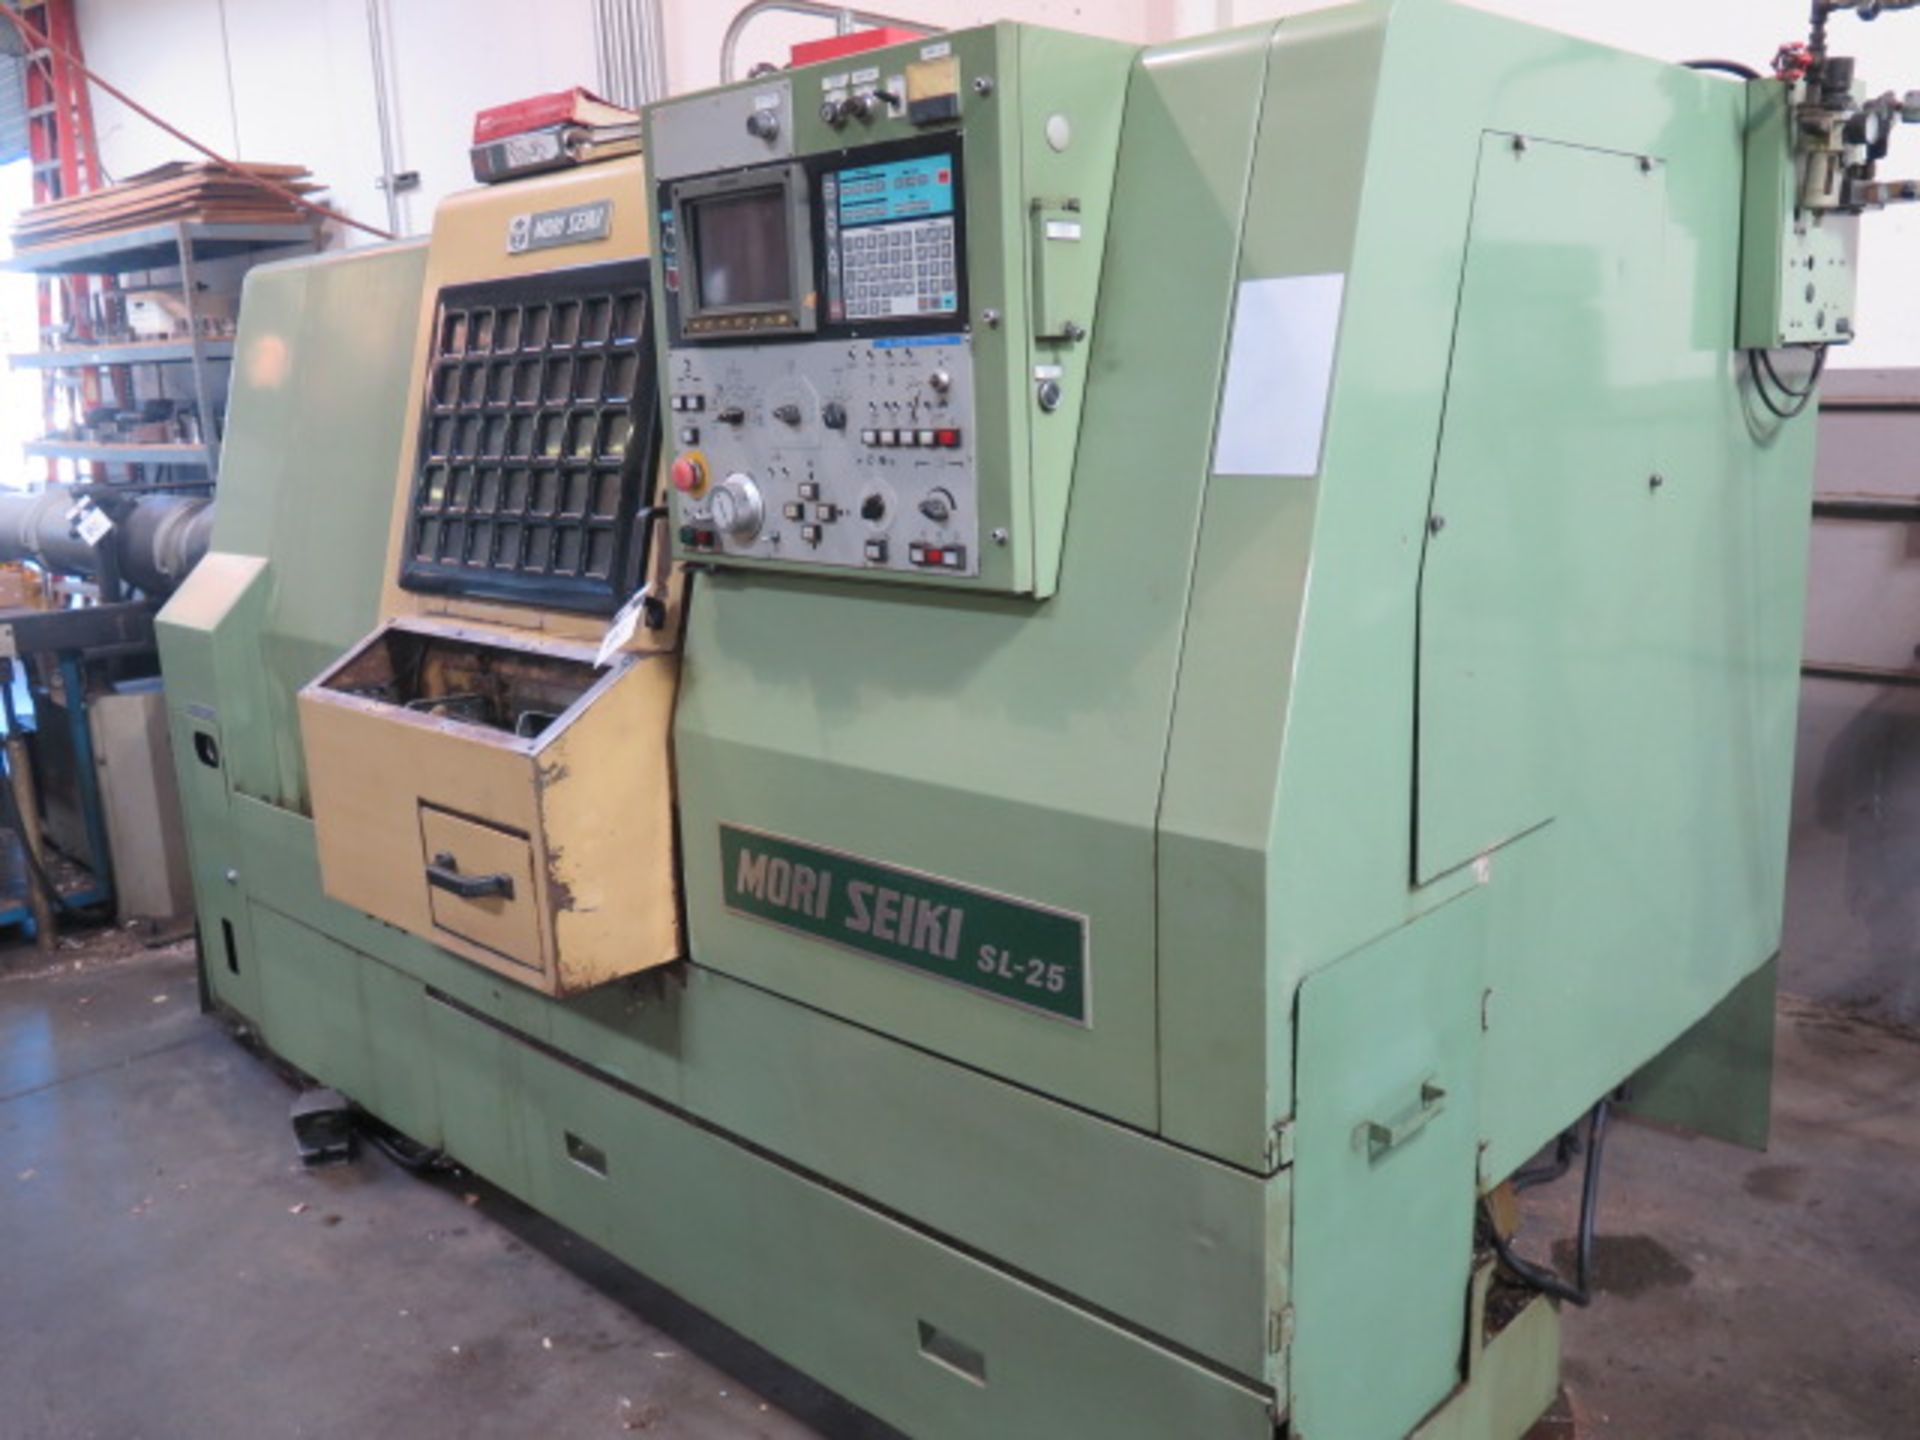 Mori Seiki SL-25 CNC Turning Center s/n 3178 w/ Yasnac Controls, 10-Station, Hydraulic, SOLD AS IS - Image 2 of 11